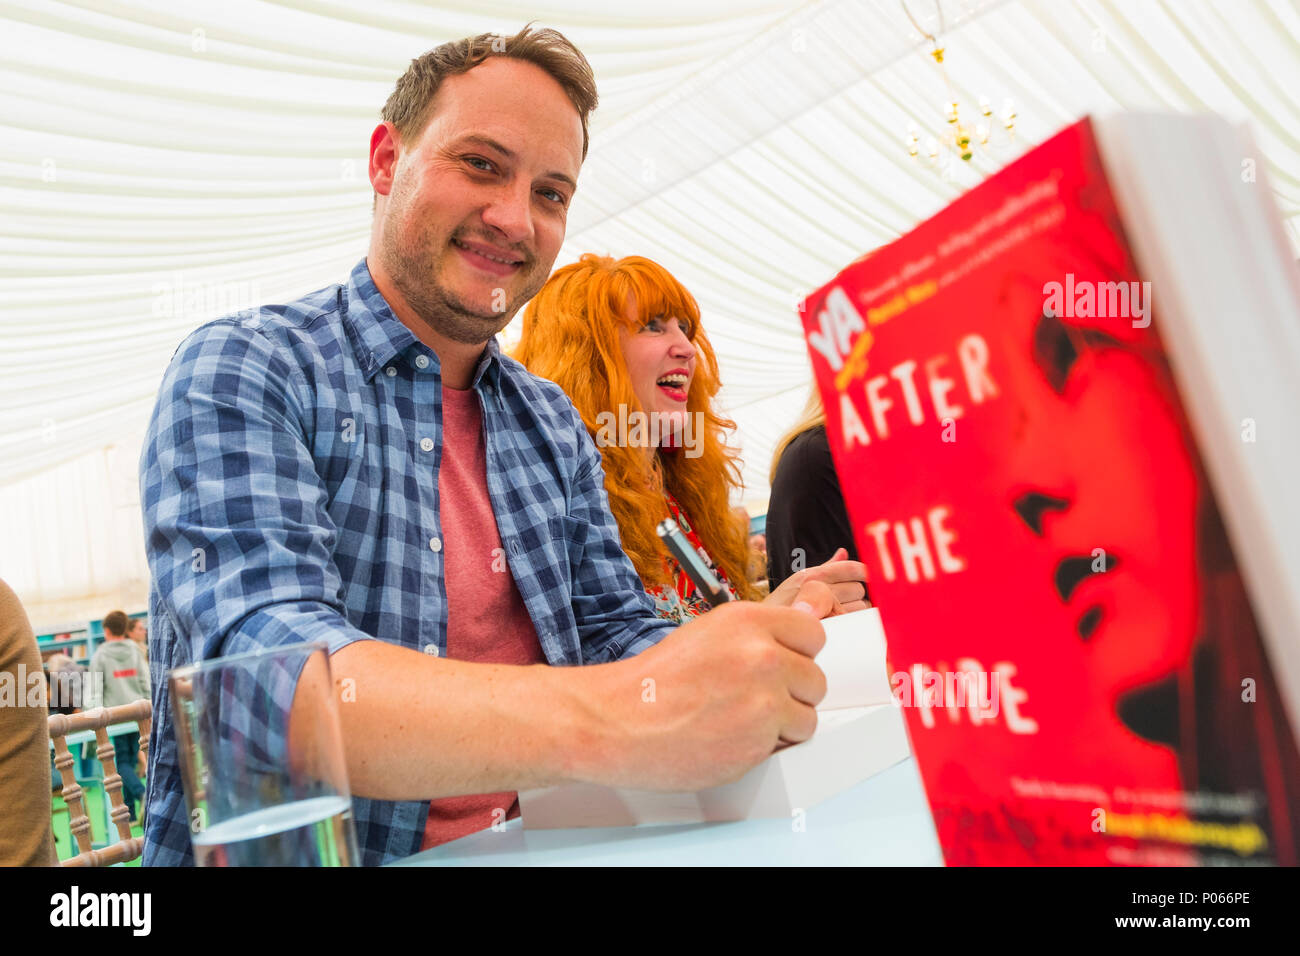 Will Hill, writer of books for YA - young adults, winner of ther 2018 The Bookseller award for the best YA novel of the year, for his book 'After the Fire'  At the Hay Festival  of Literature and the Arts, May 2018 Stock Photo